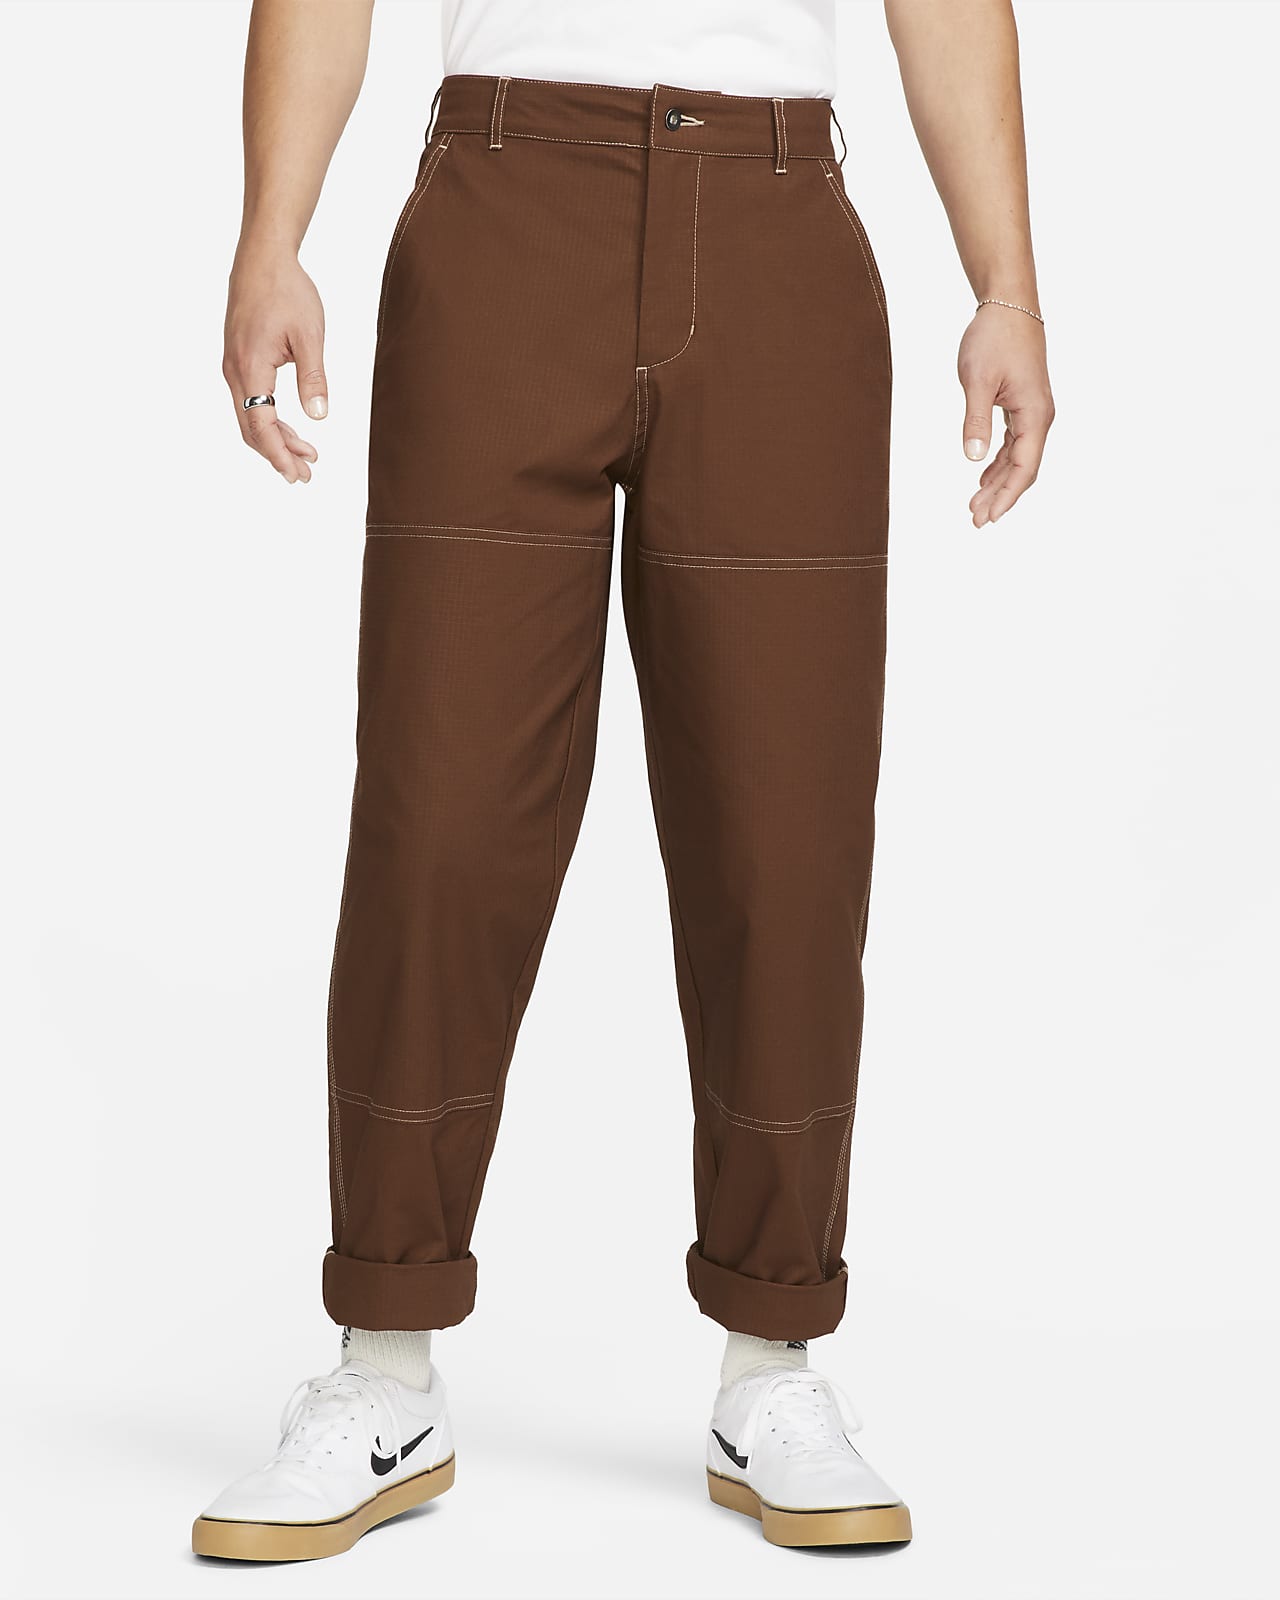 https://static.nike.com/a/images/t_PDP_1280_v1/f_auto,q_auto:eco/bae96746-8fb2-4a0b-b1fa-0d3c039ffb86/sb-double-knee-skate-trousers-gLsrwG.png